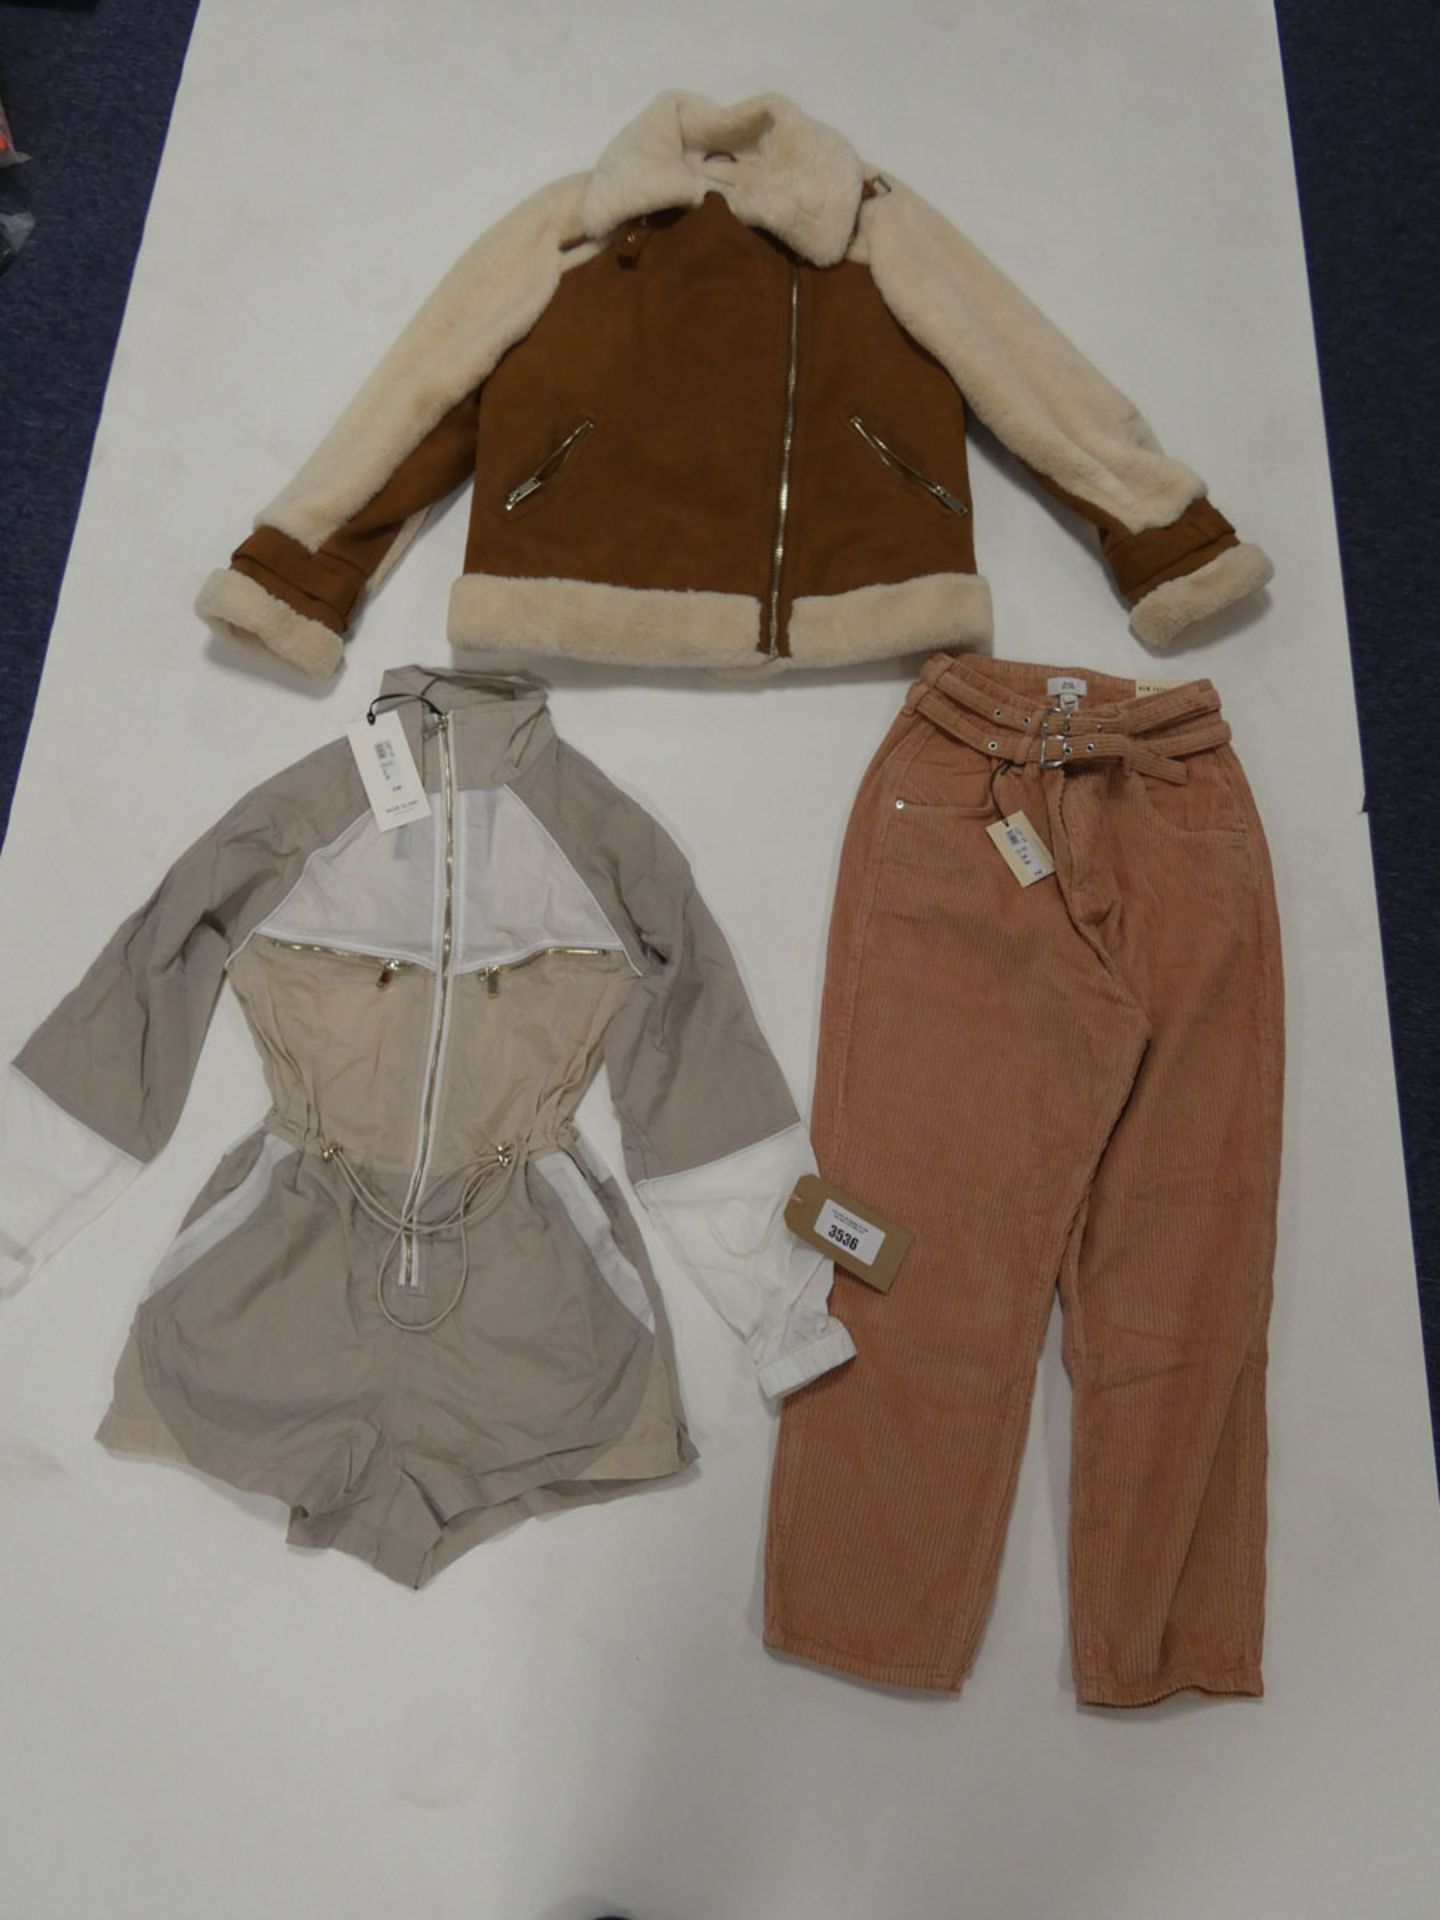 Selection of River Island clothing to include 2 jackets and trousers